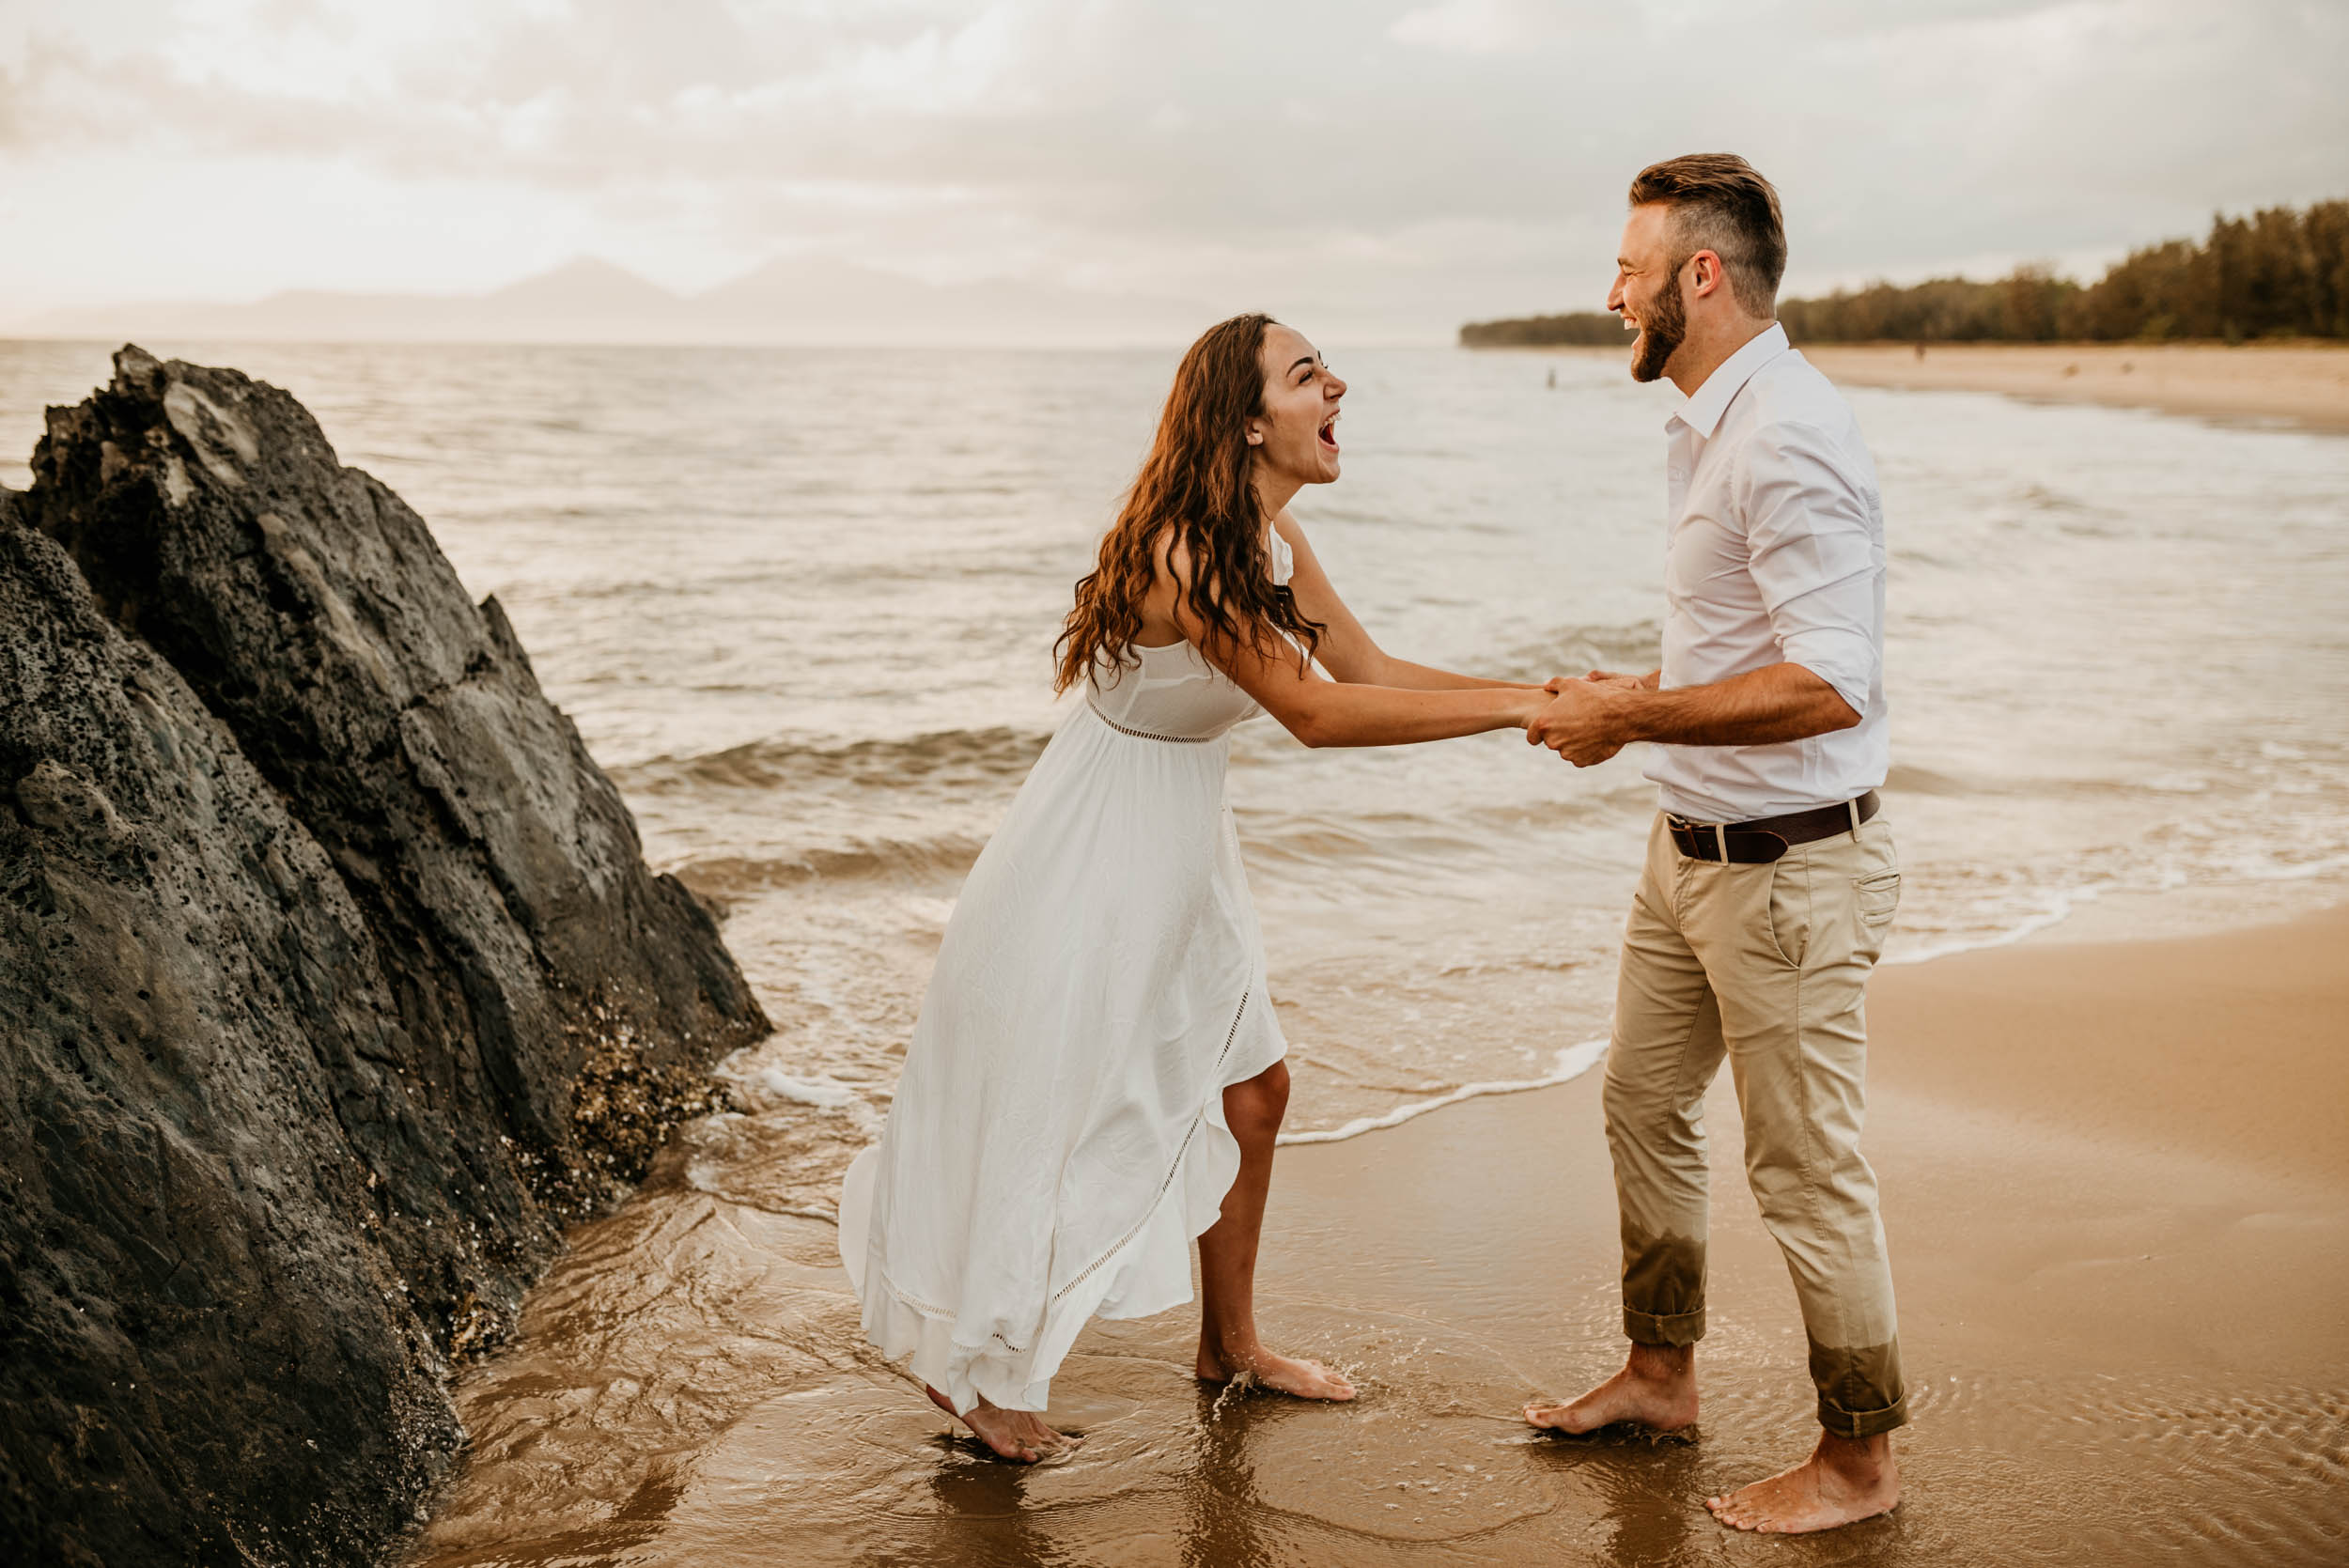 The Raw Photographer - Cairns Wedding Photographer - Engaged Engagement - Beach location - Candid Photography Queensland-32.jpg